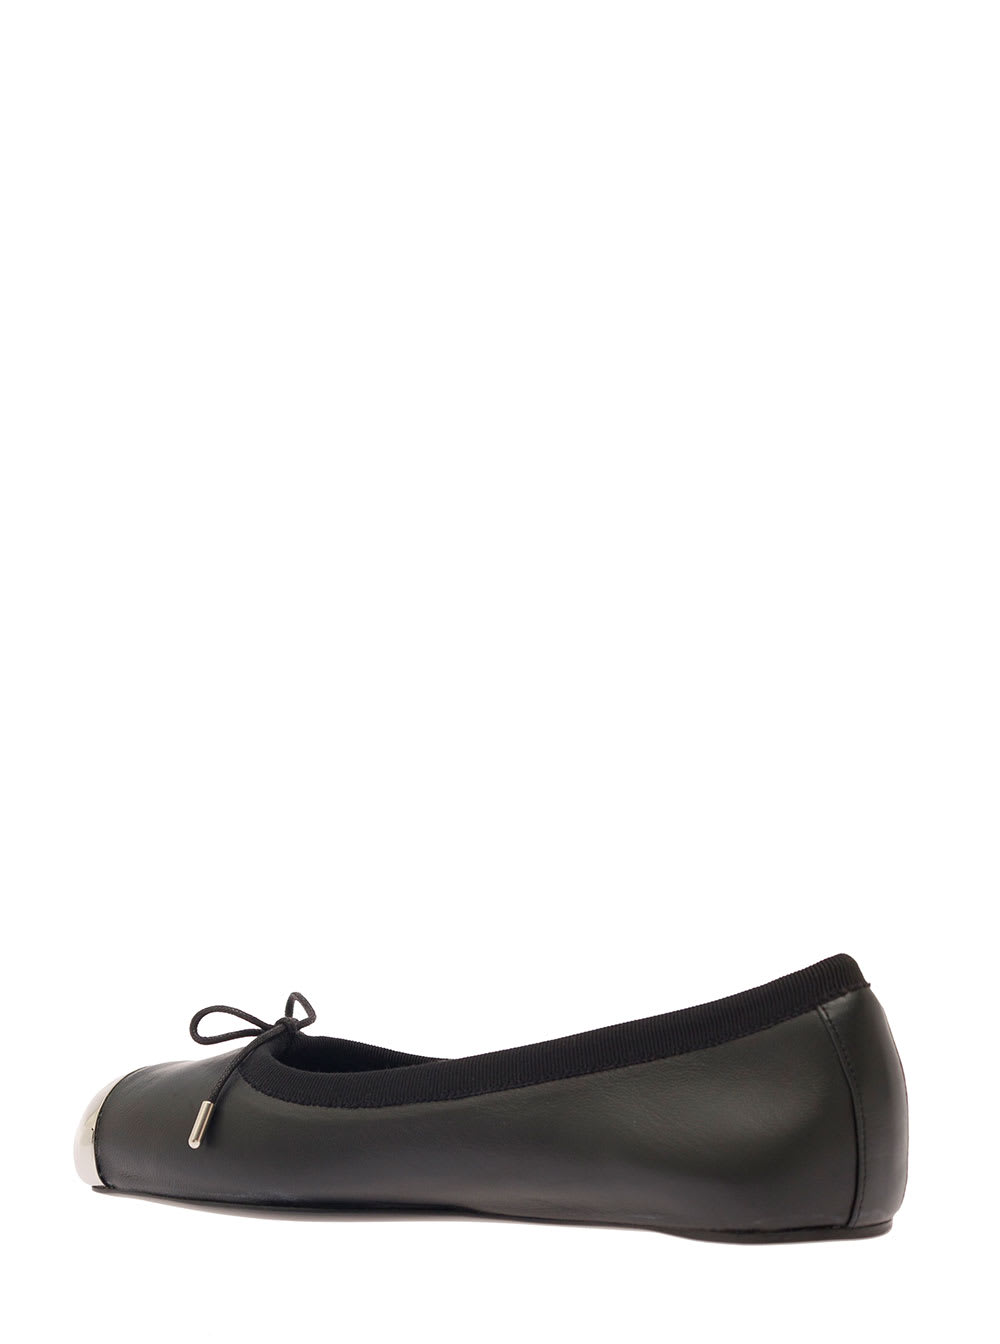 Shop Alexander Mcqueen Black Ballet Flats With Metallic Toe In Smooth Leather Woman